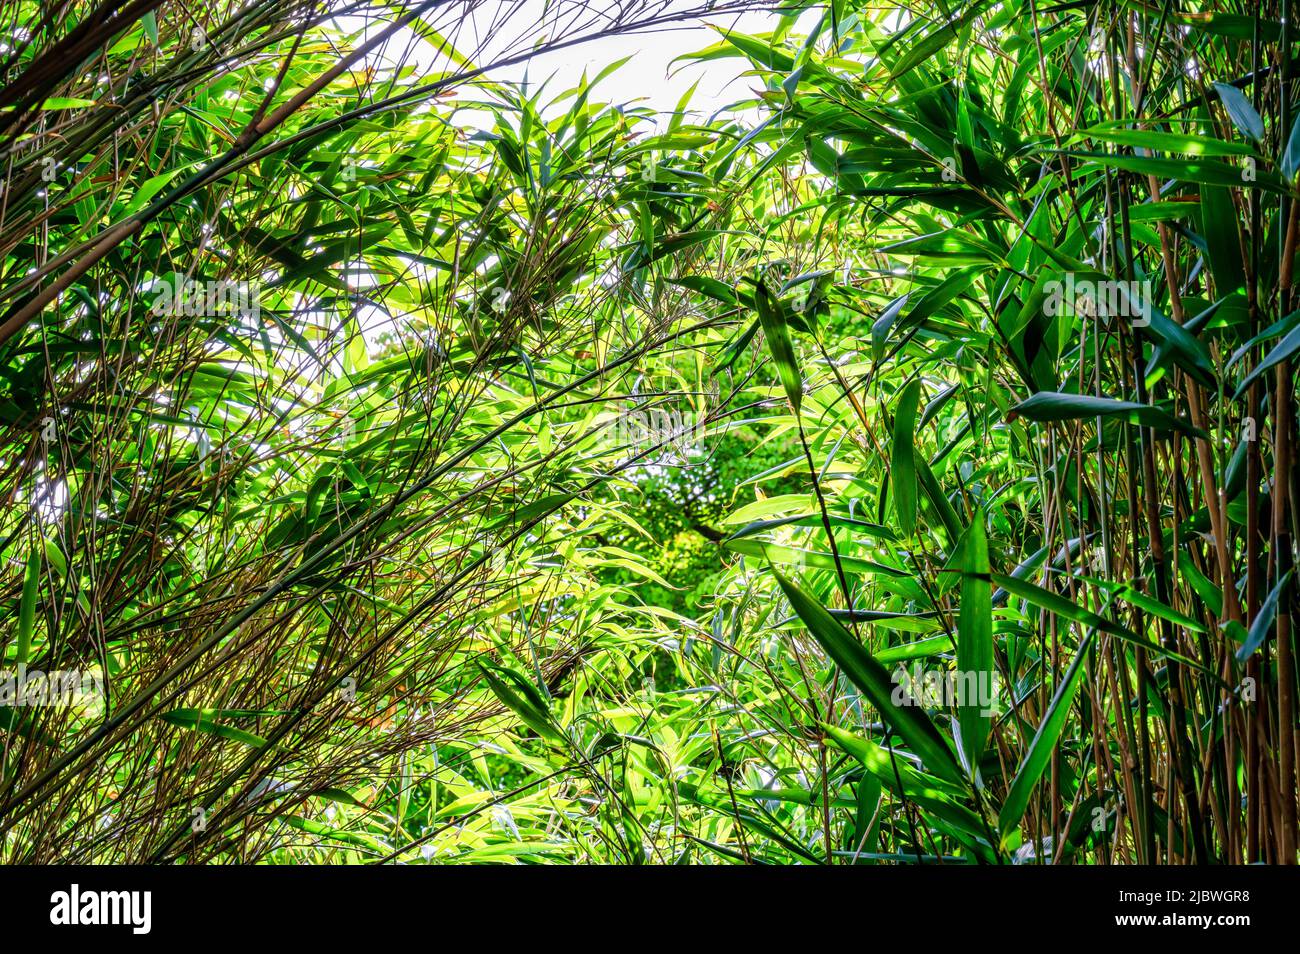 A canopy of green bamboo leaves Stock Photo